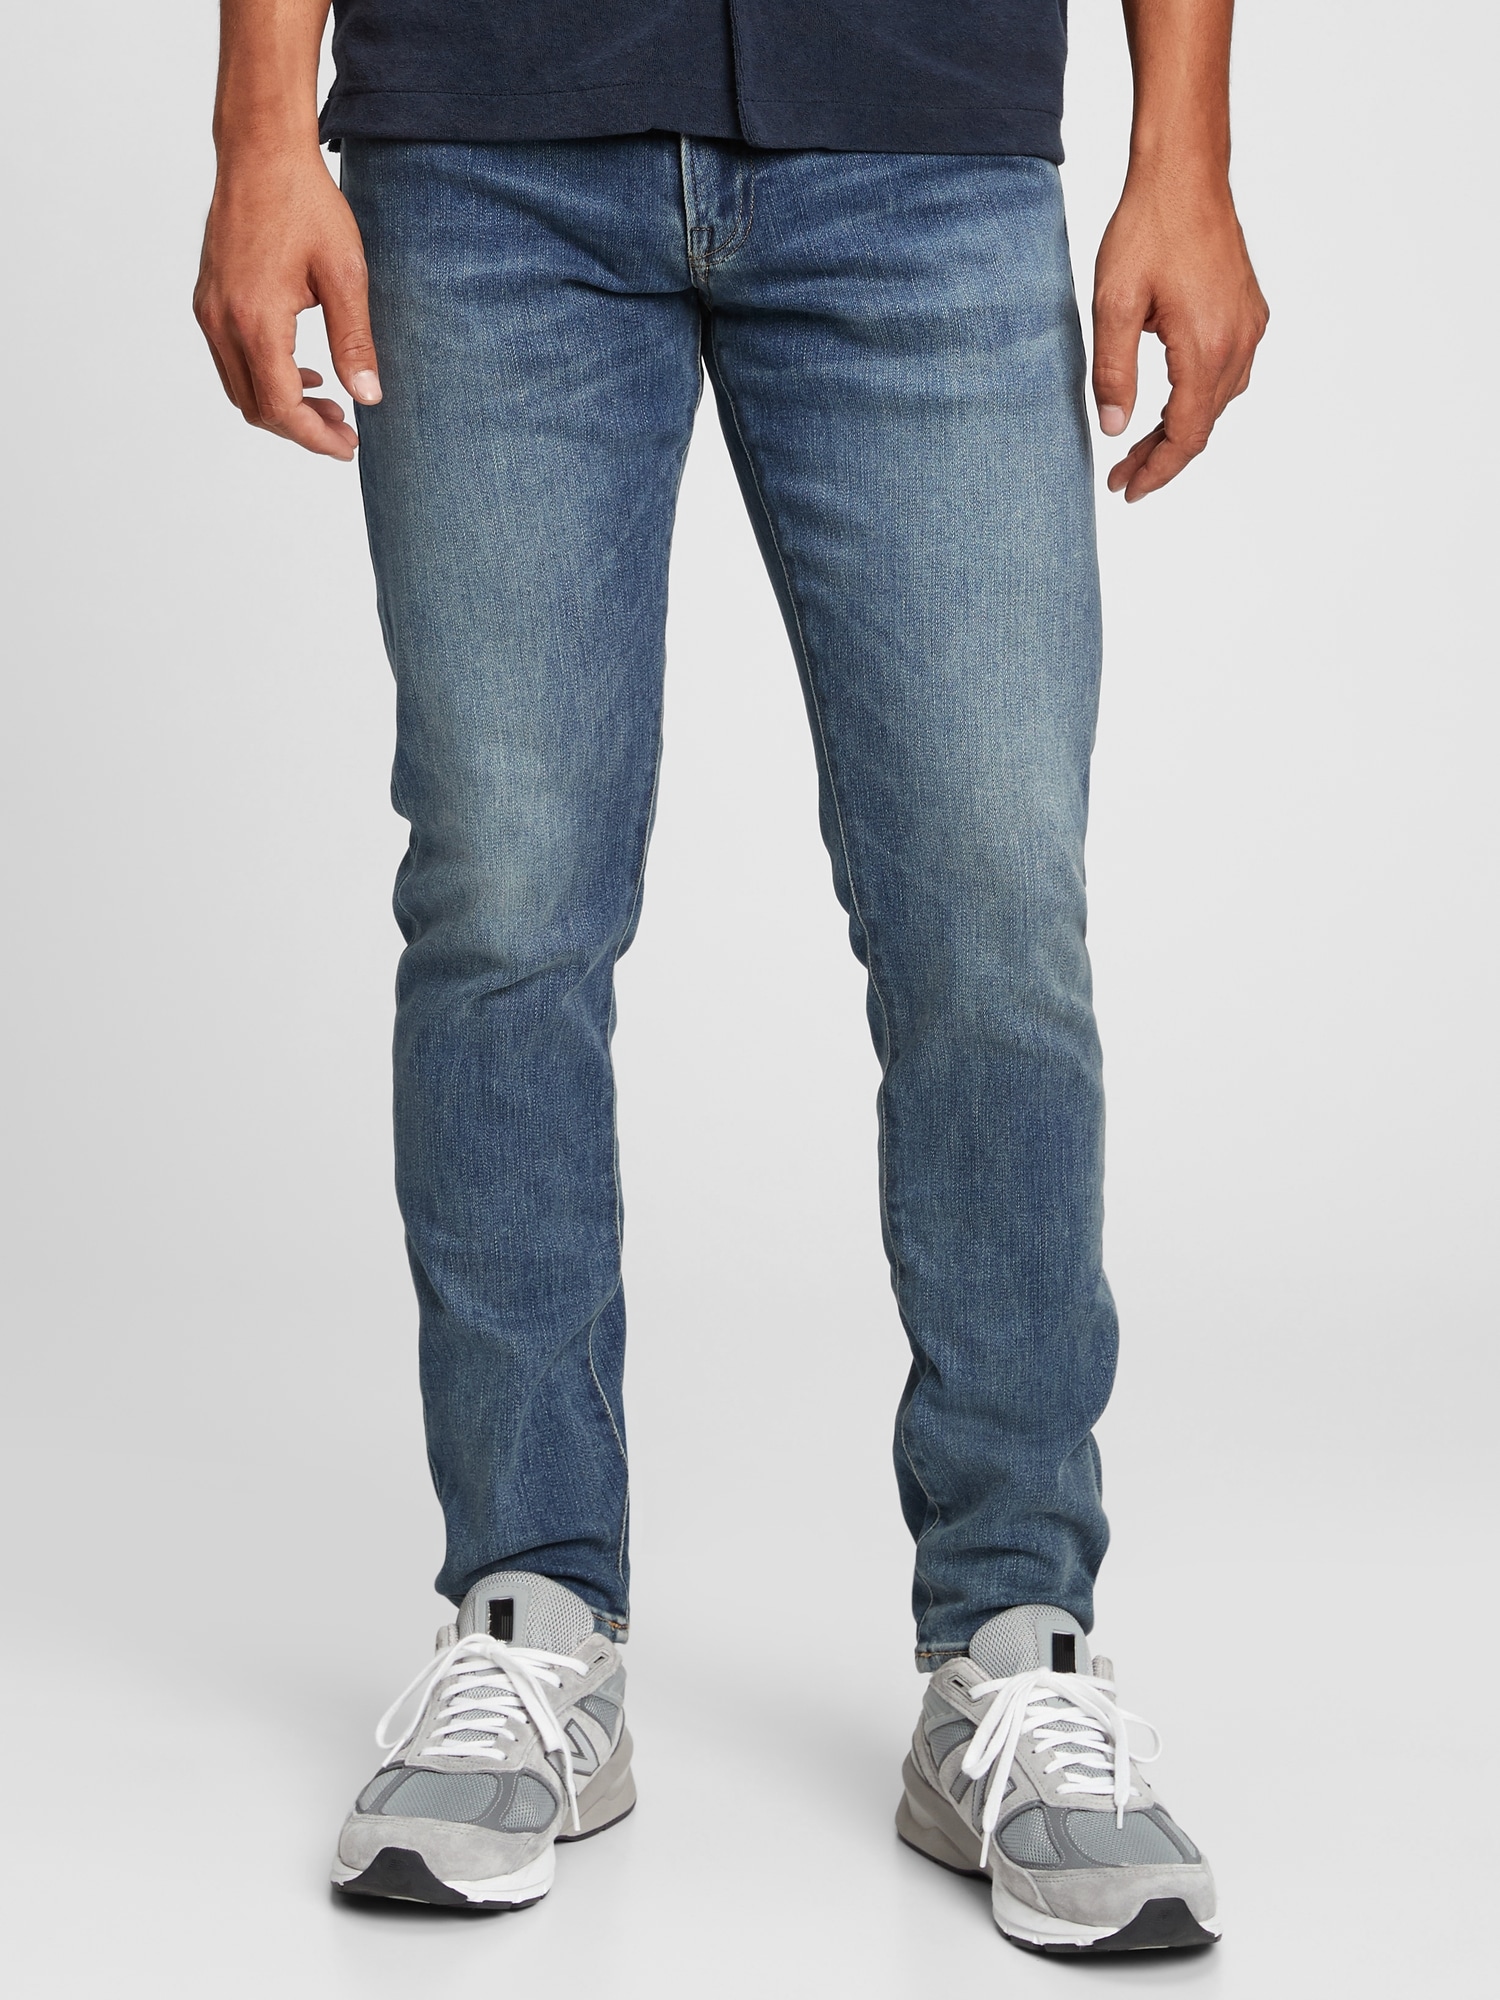 Gap  Jeans and t shirt outfit, Tapered jeans, Most comfortable jeans